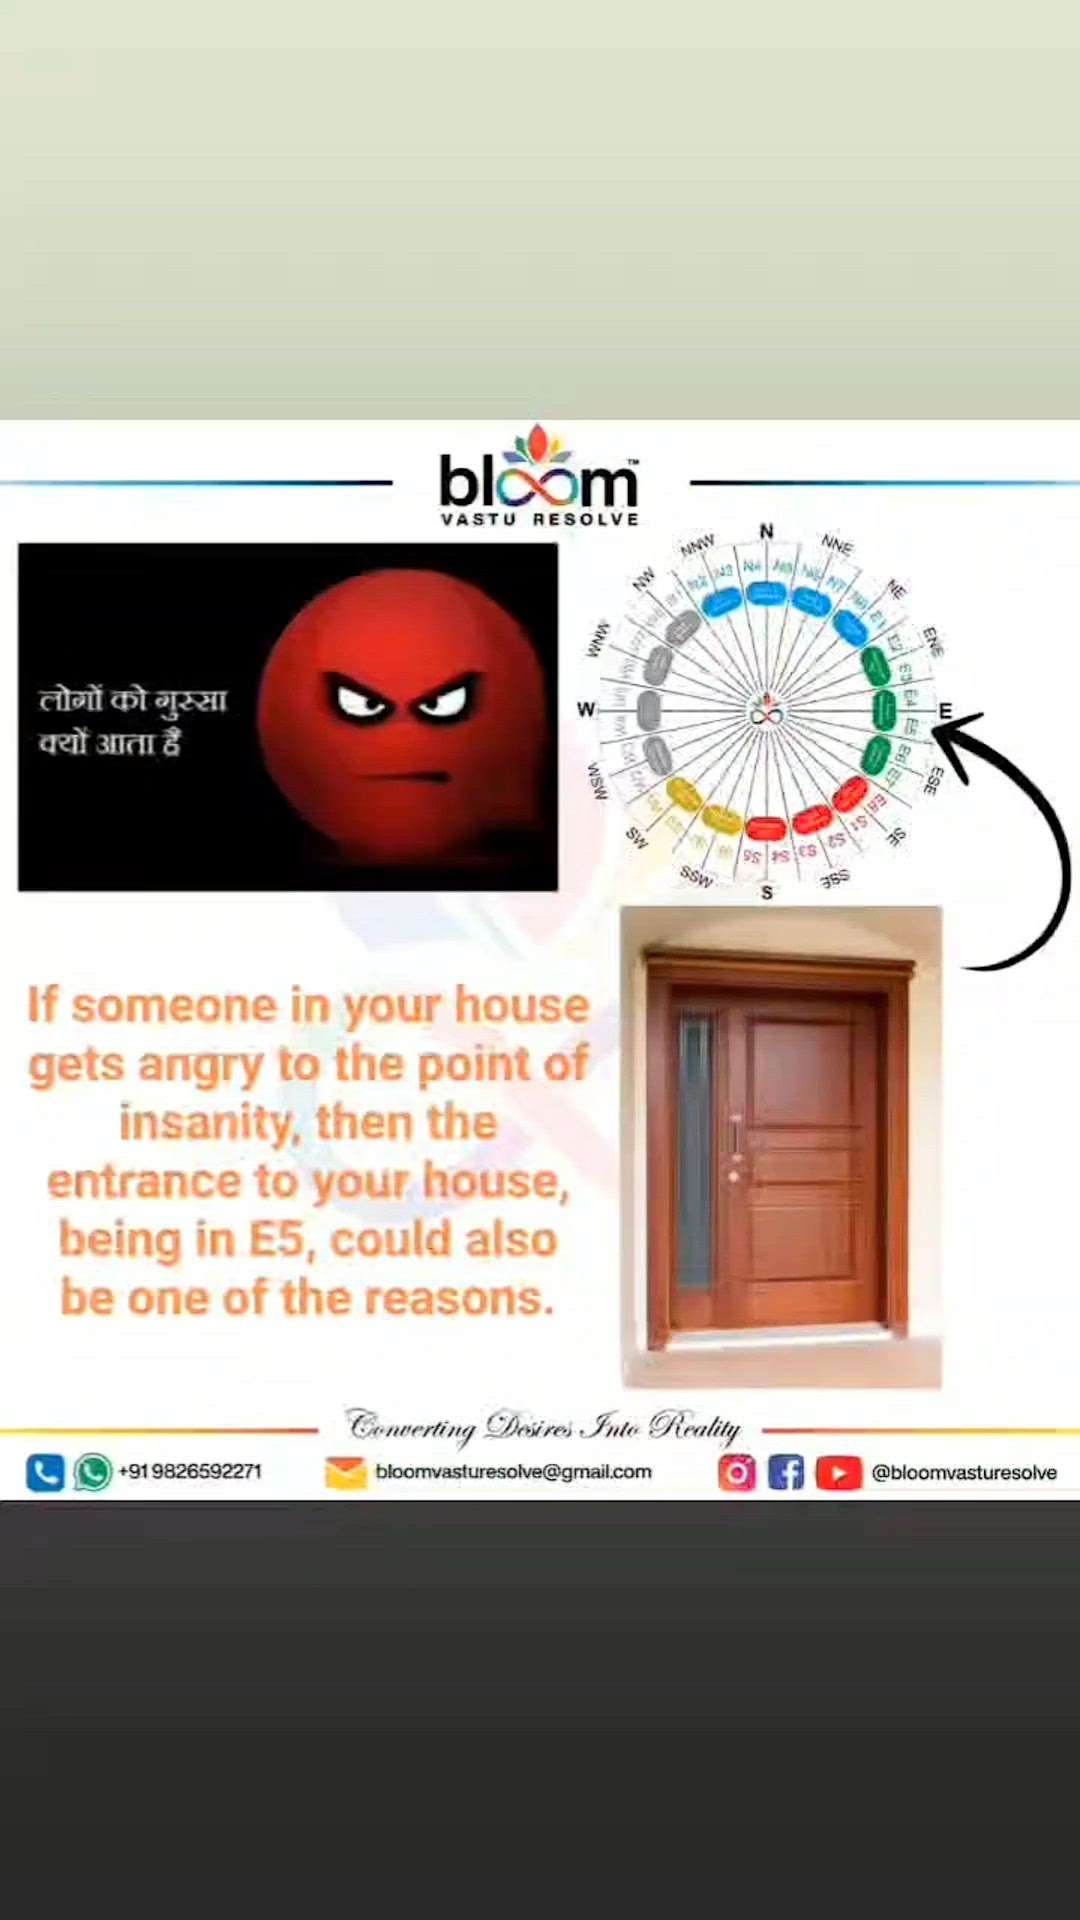 Your queries and comments are always welcome.
For more Vastu please follow @bloomvasturesolve
on YouTube, Instagram & Facebook
.
.
For personal consultation, feel free to contact certified MahaVastu Expert through
M - 9826592271
Or
bloomvasturesolve@gmail.com
#vastu #वास्तु #mahavastu #mahavastuexpert #bloomvasturesolve  #vastureels #vastulogy #vastuexpert  #vasturemedies  #vastuforhome #vastuforpeace #vastudosh #numerology #vastuforentrance #entrance #maindoor